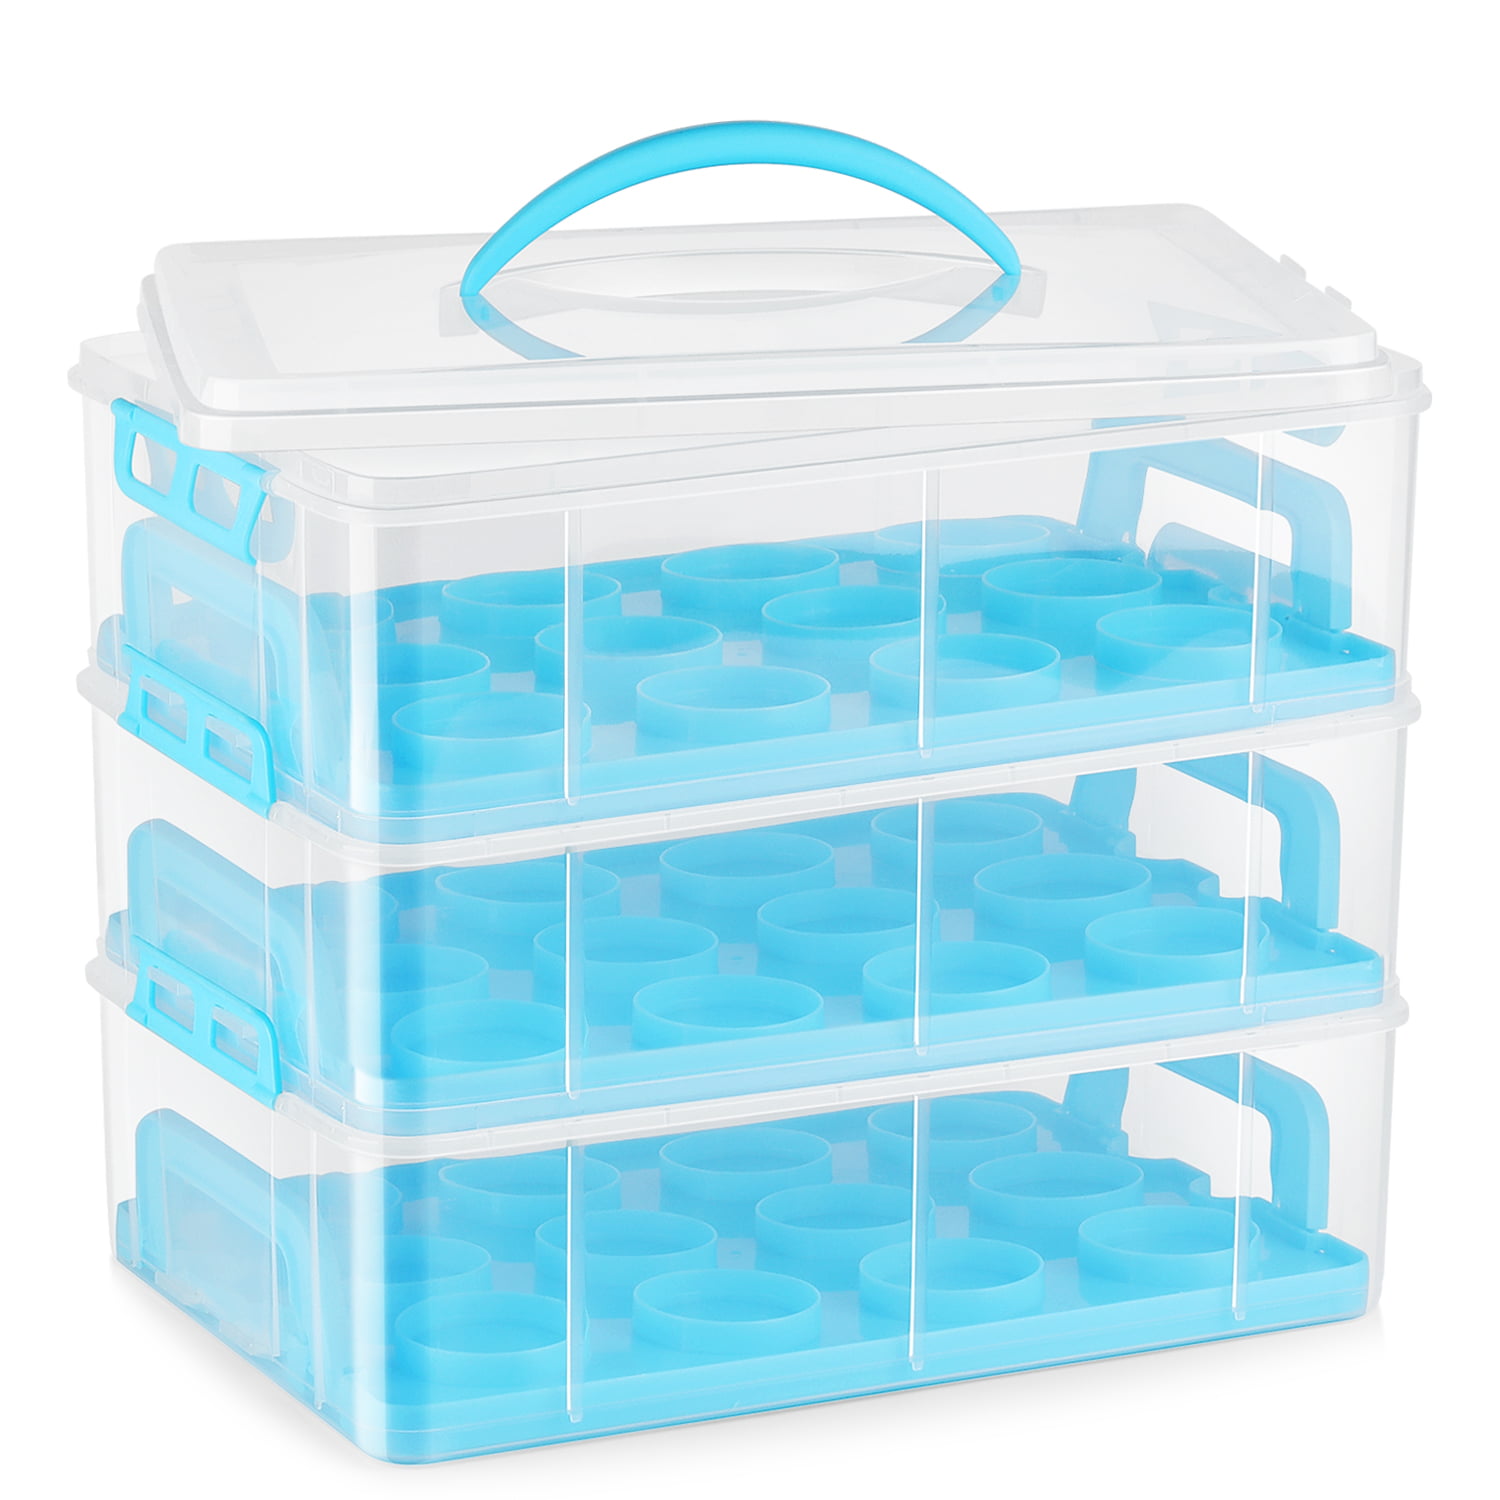 Silvermark Inflate And Take Cupcake Carrier - 24 Slot : Target